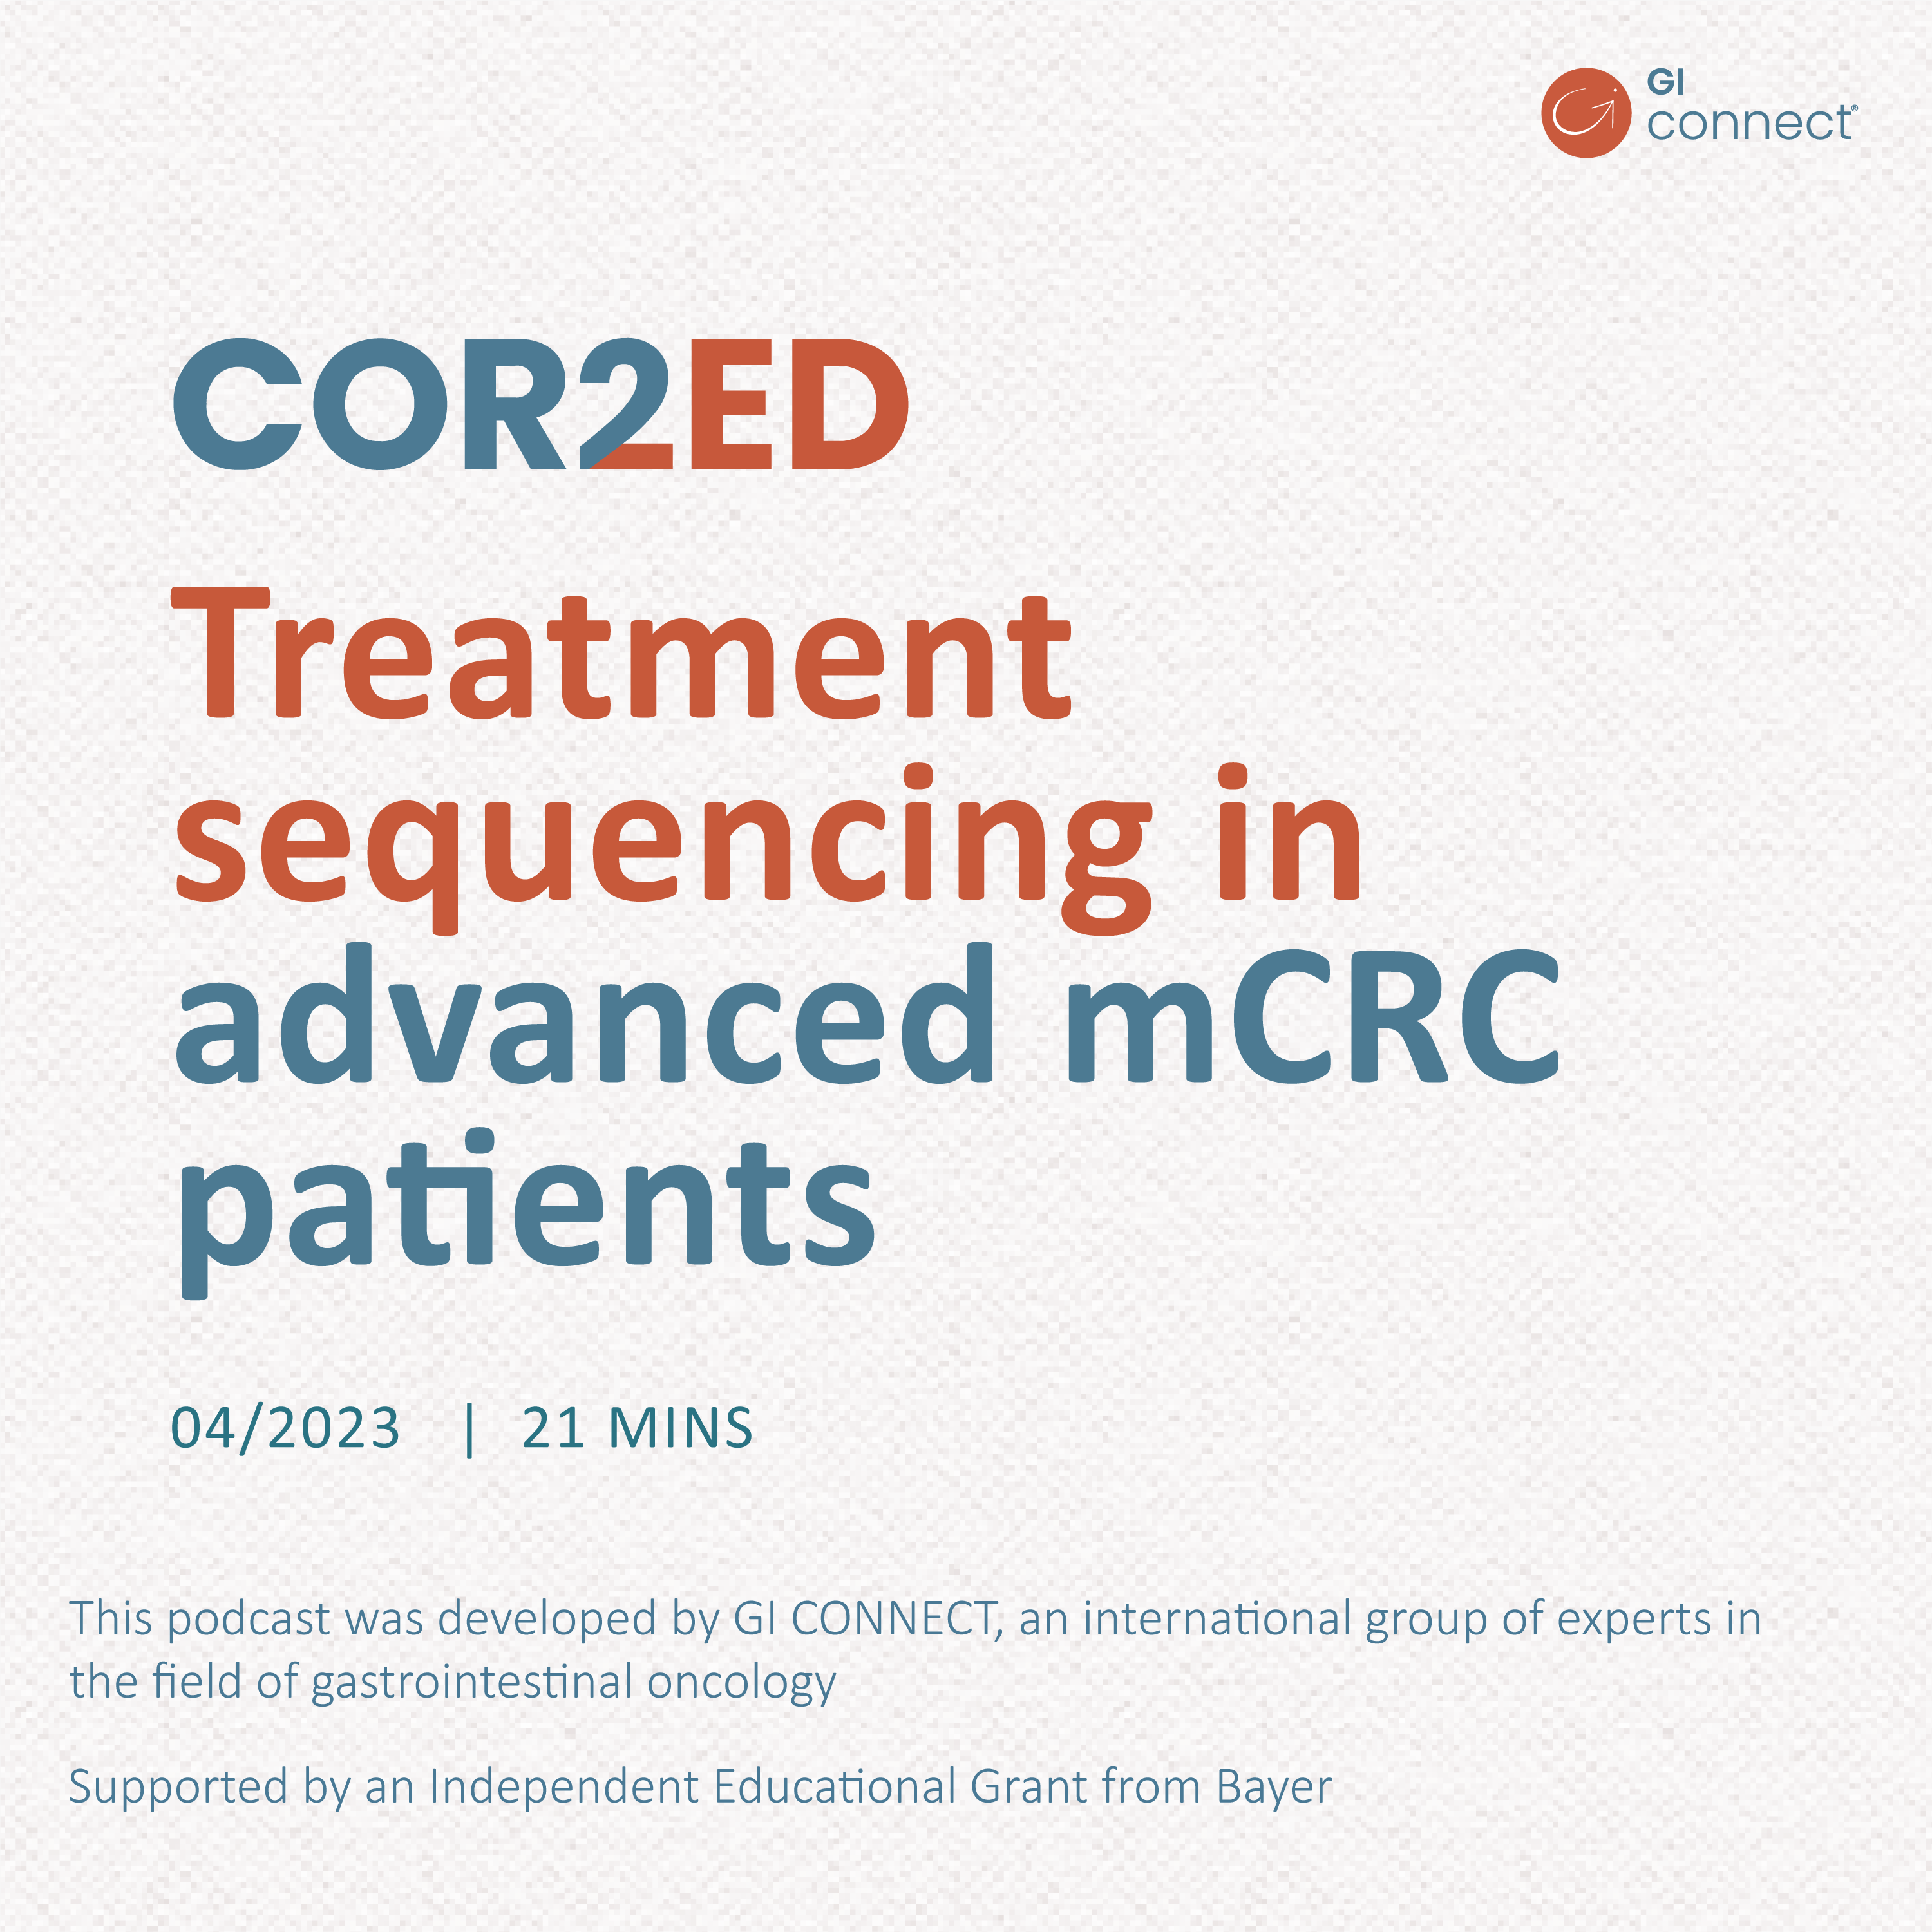 Treatment sequencing in advanced mCRC patients